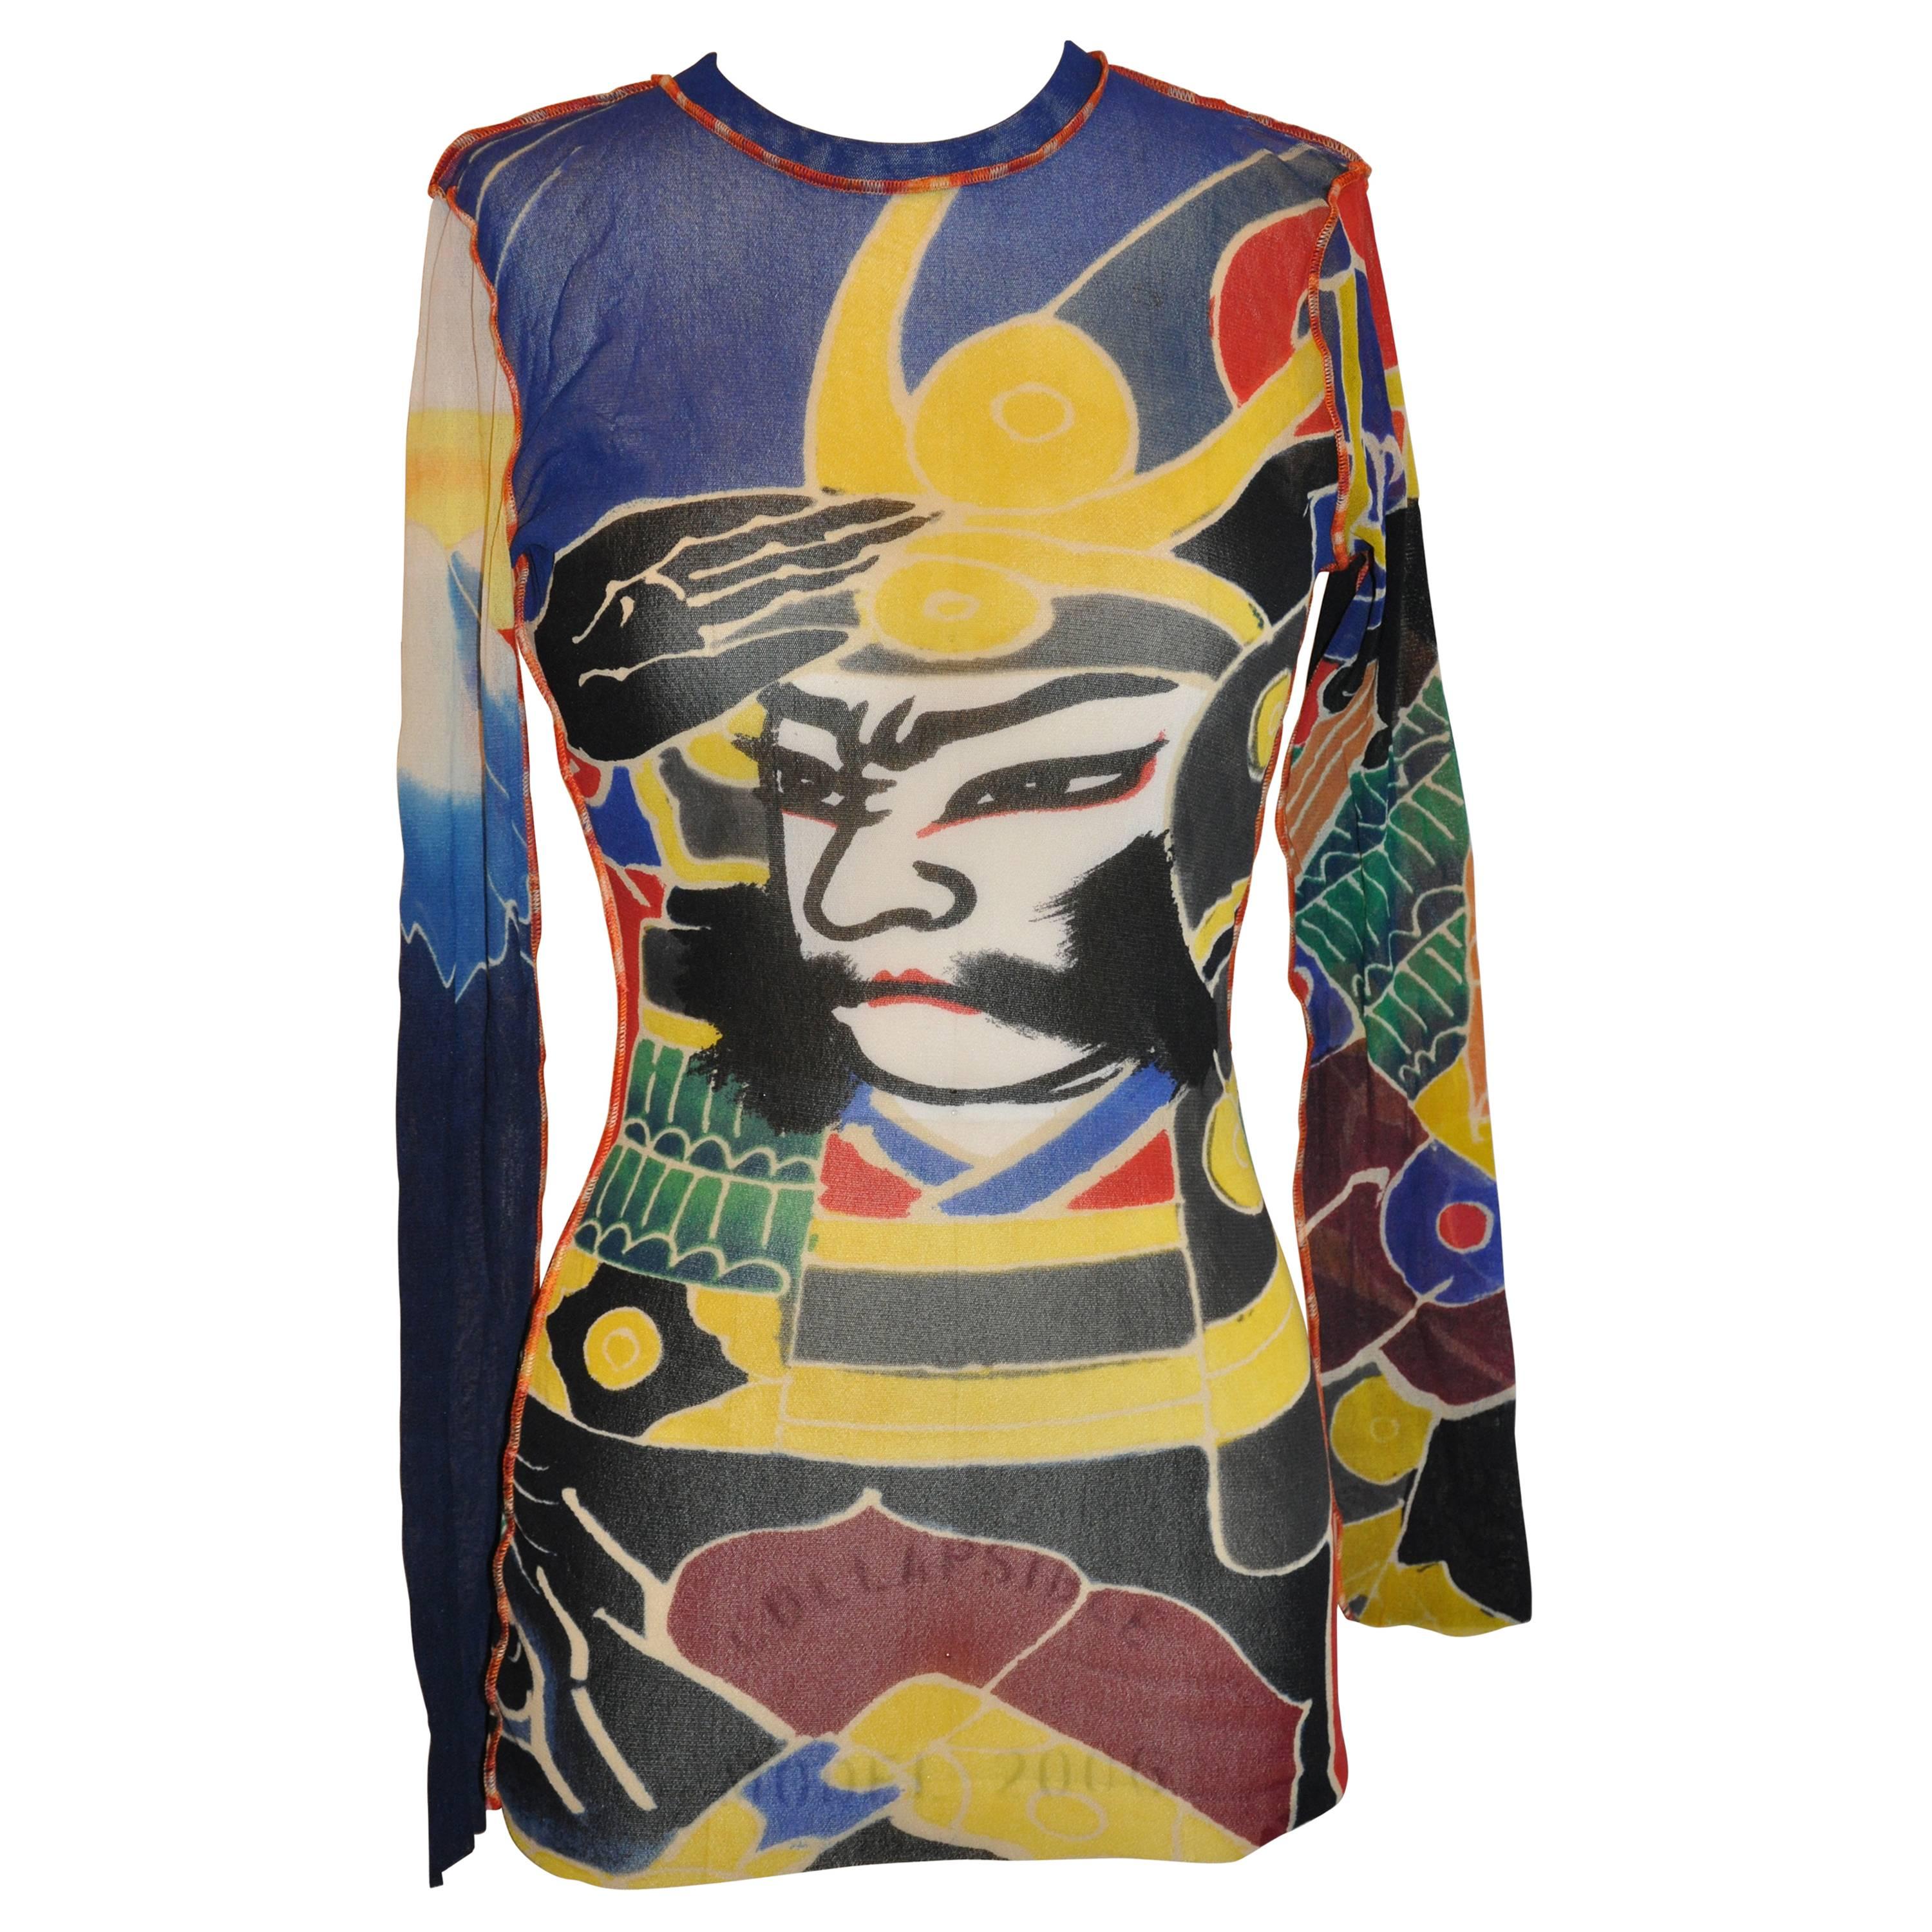 Jean Paul Gaultier "Japanese Theme" Multi-Color Netted Pullover